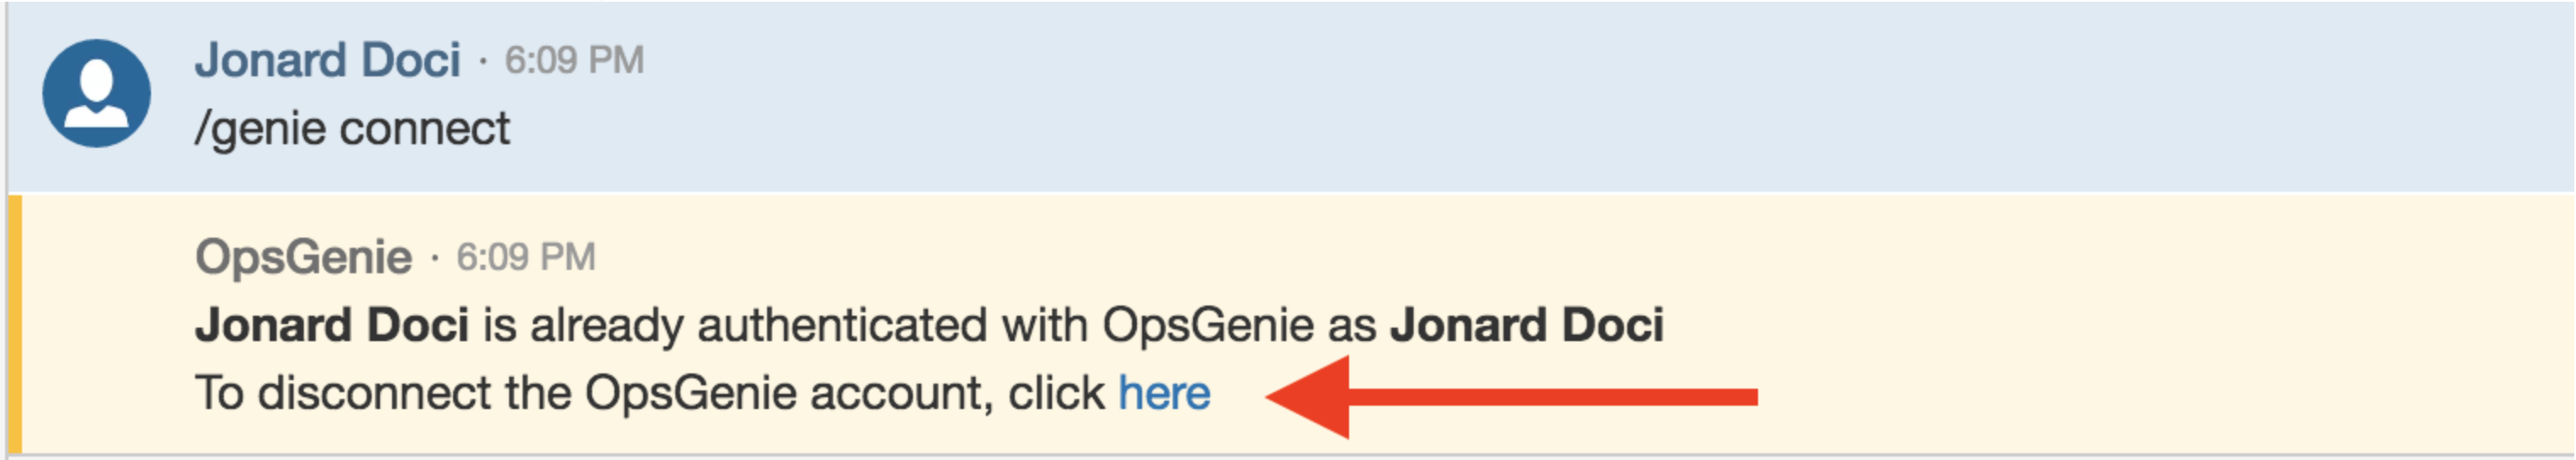 A screenshot that shows how to disassociate existing Opsgenie account.